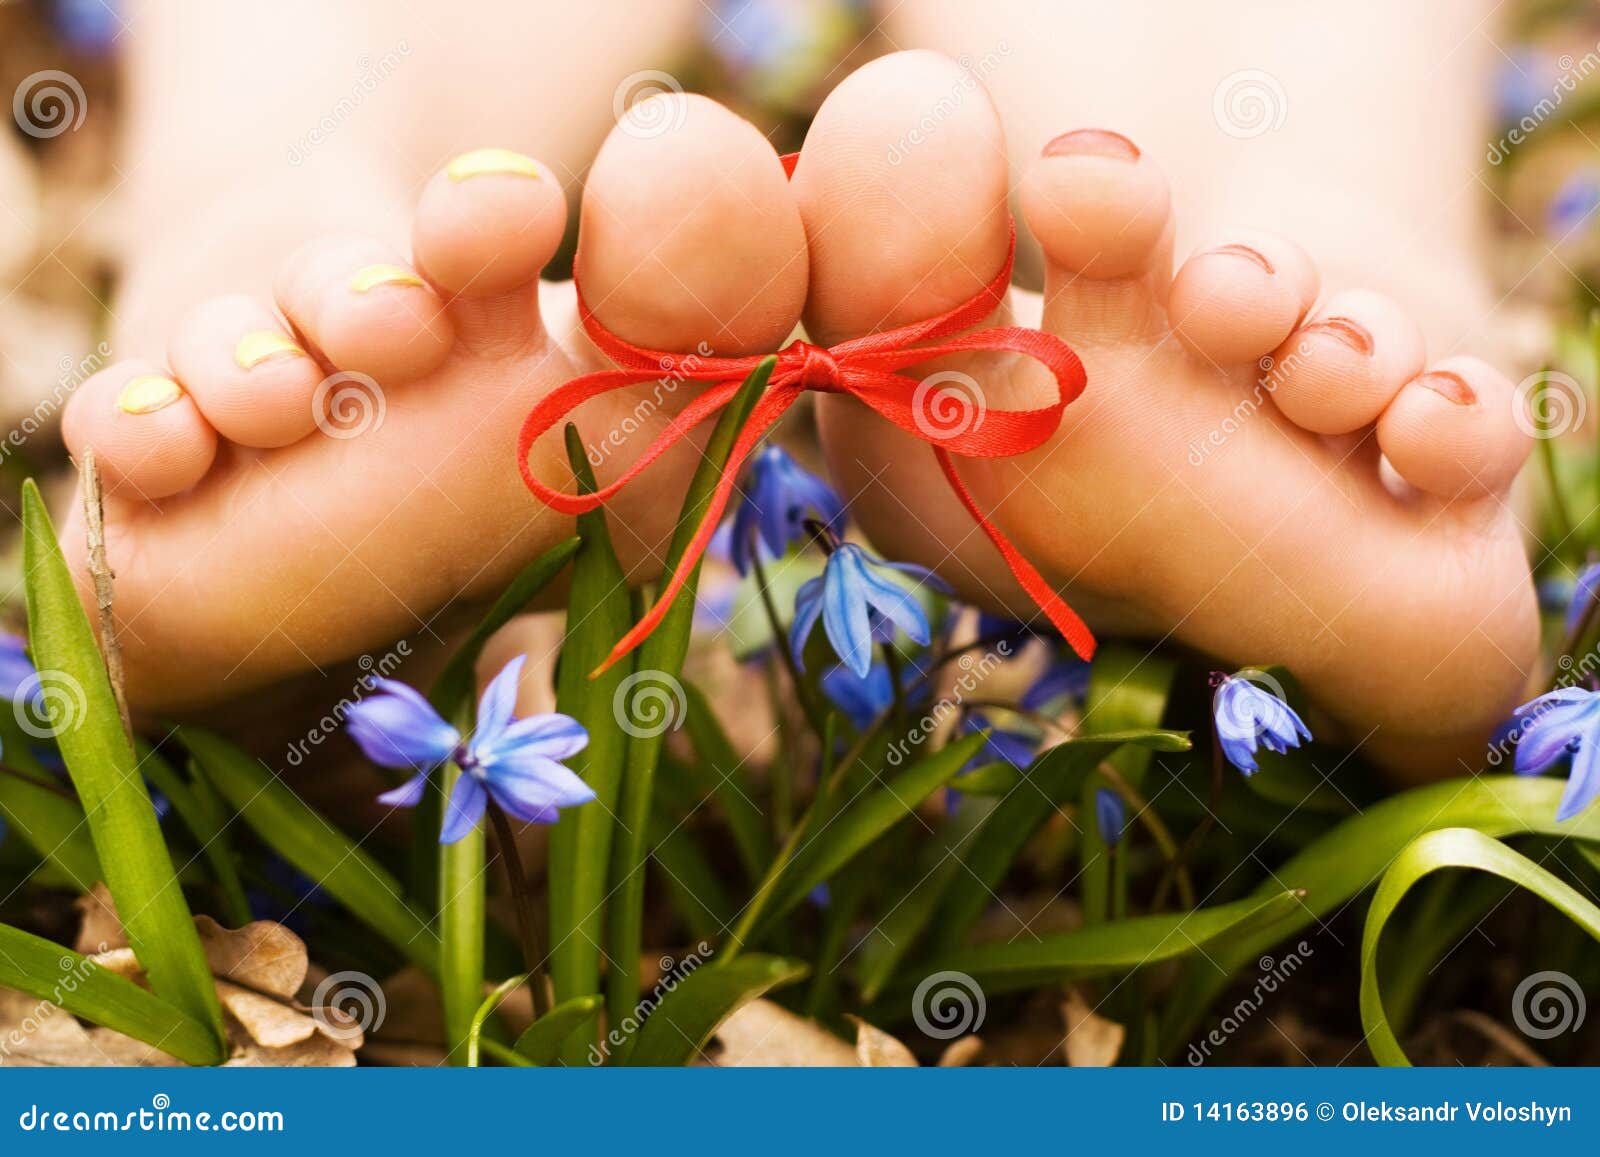 barefooted woman's feet in flowers. ribbon bow